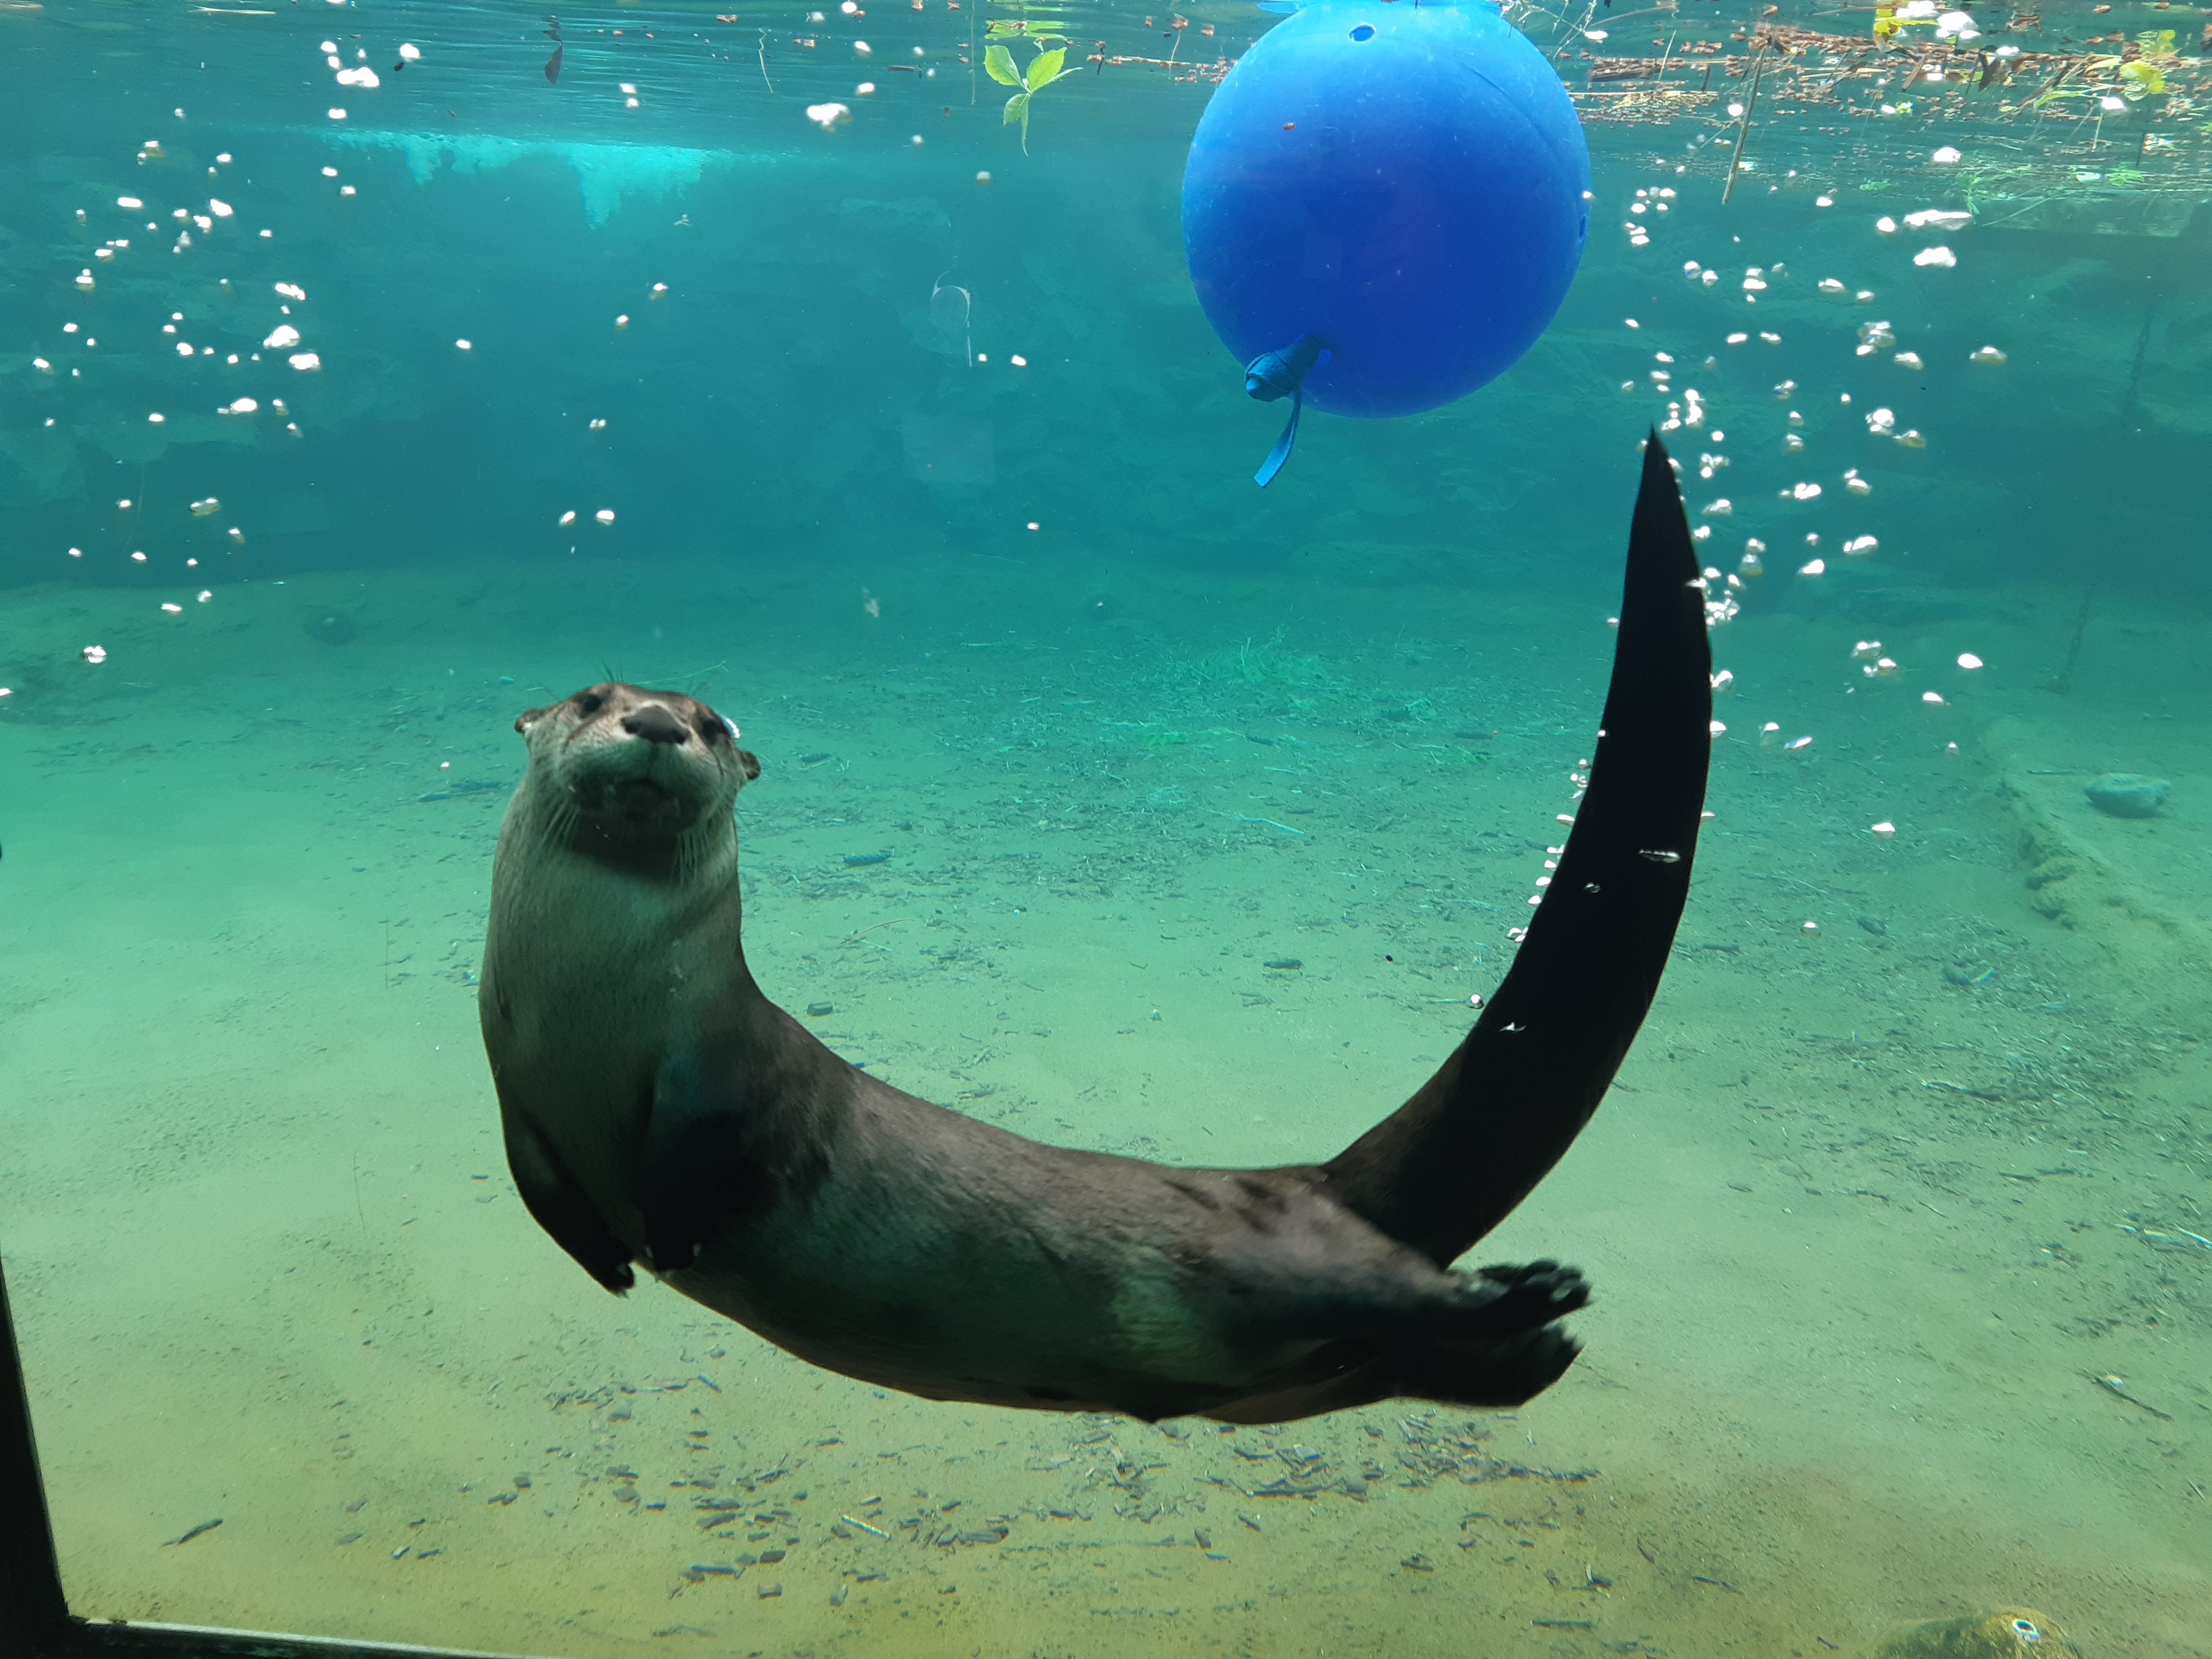 an otter swimming underwater beside a floating balloon